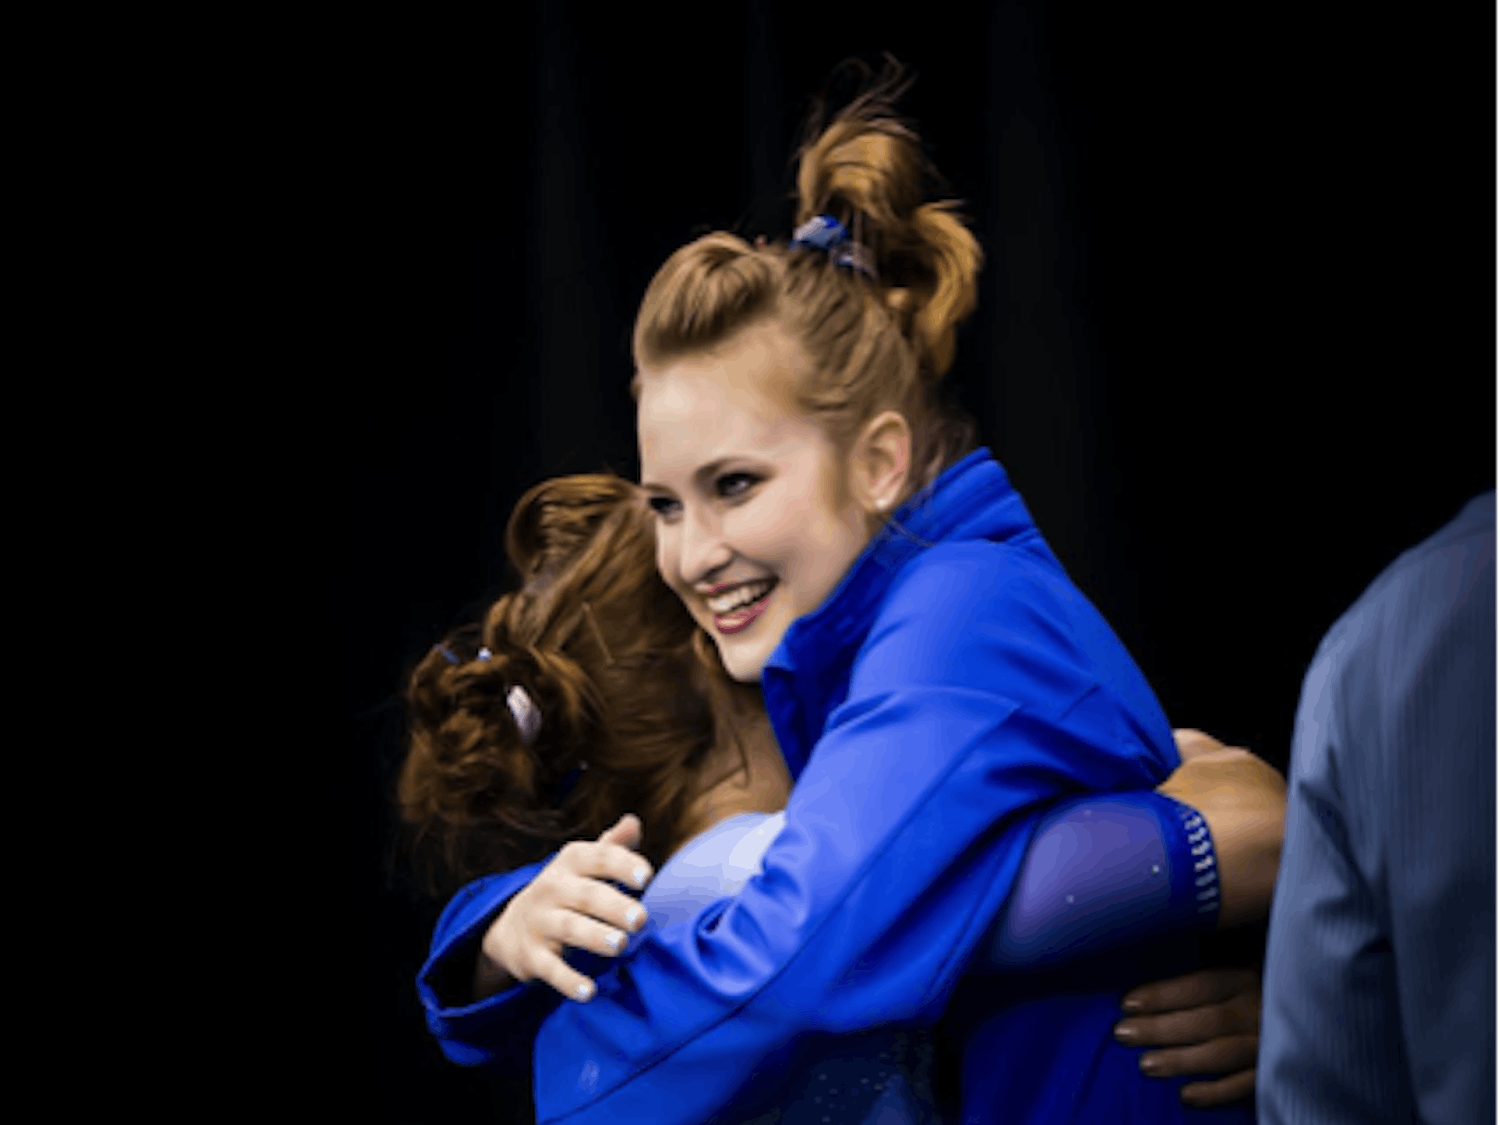 UF gymnast Claire Boyce hugs former teammate Bridget Sloan during the 2016 NCAA Super Six on April 16, 2016, in Fort Worth, Texas.